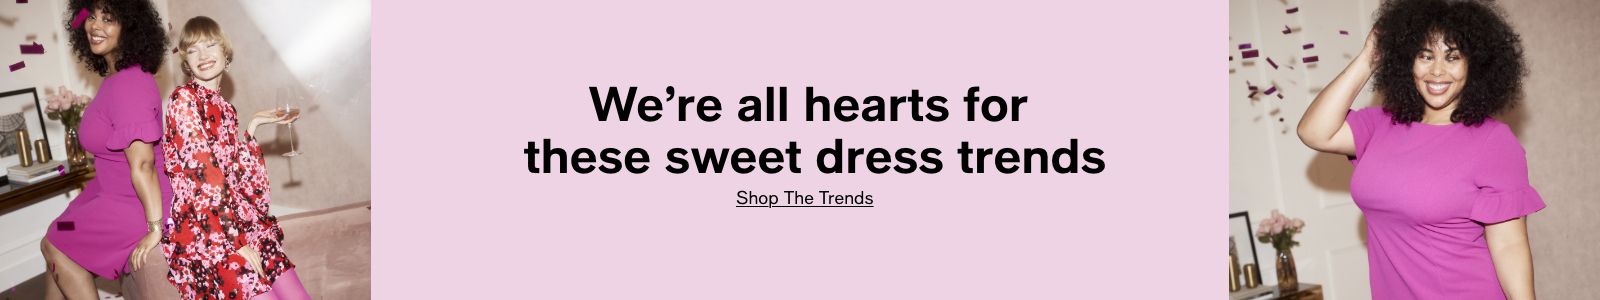 We're all hearts for these sweet dress trends, Shop The Trends